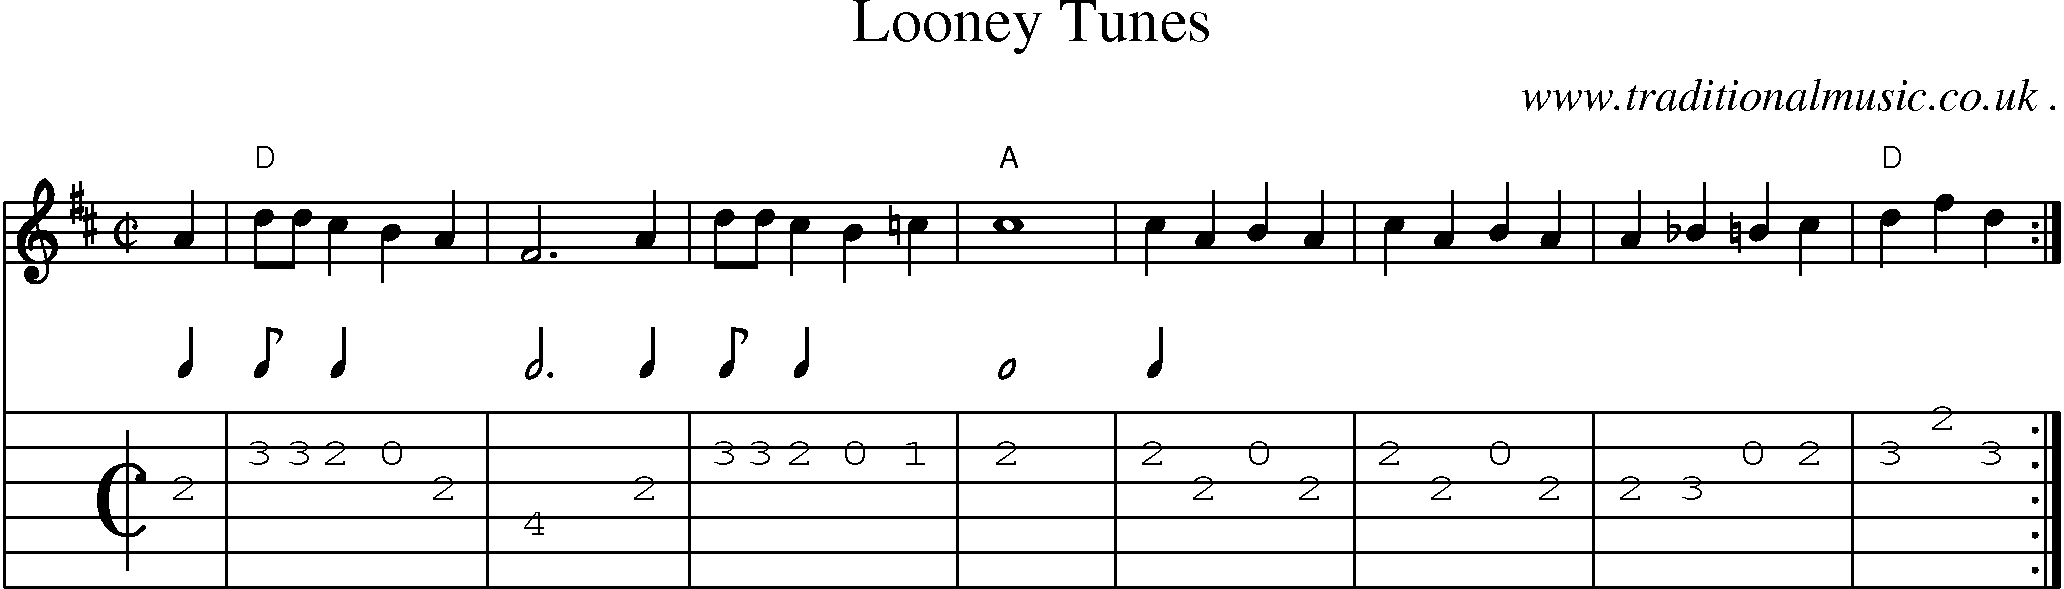 Music Score and Guitar Tabs for Looney Tunes